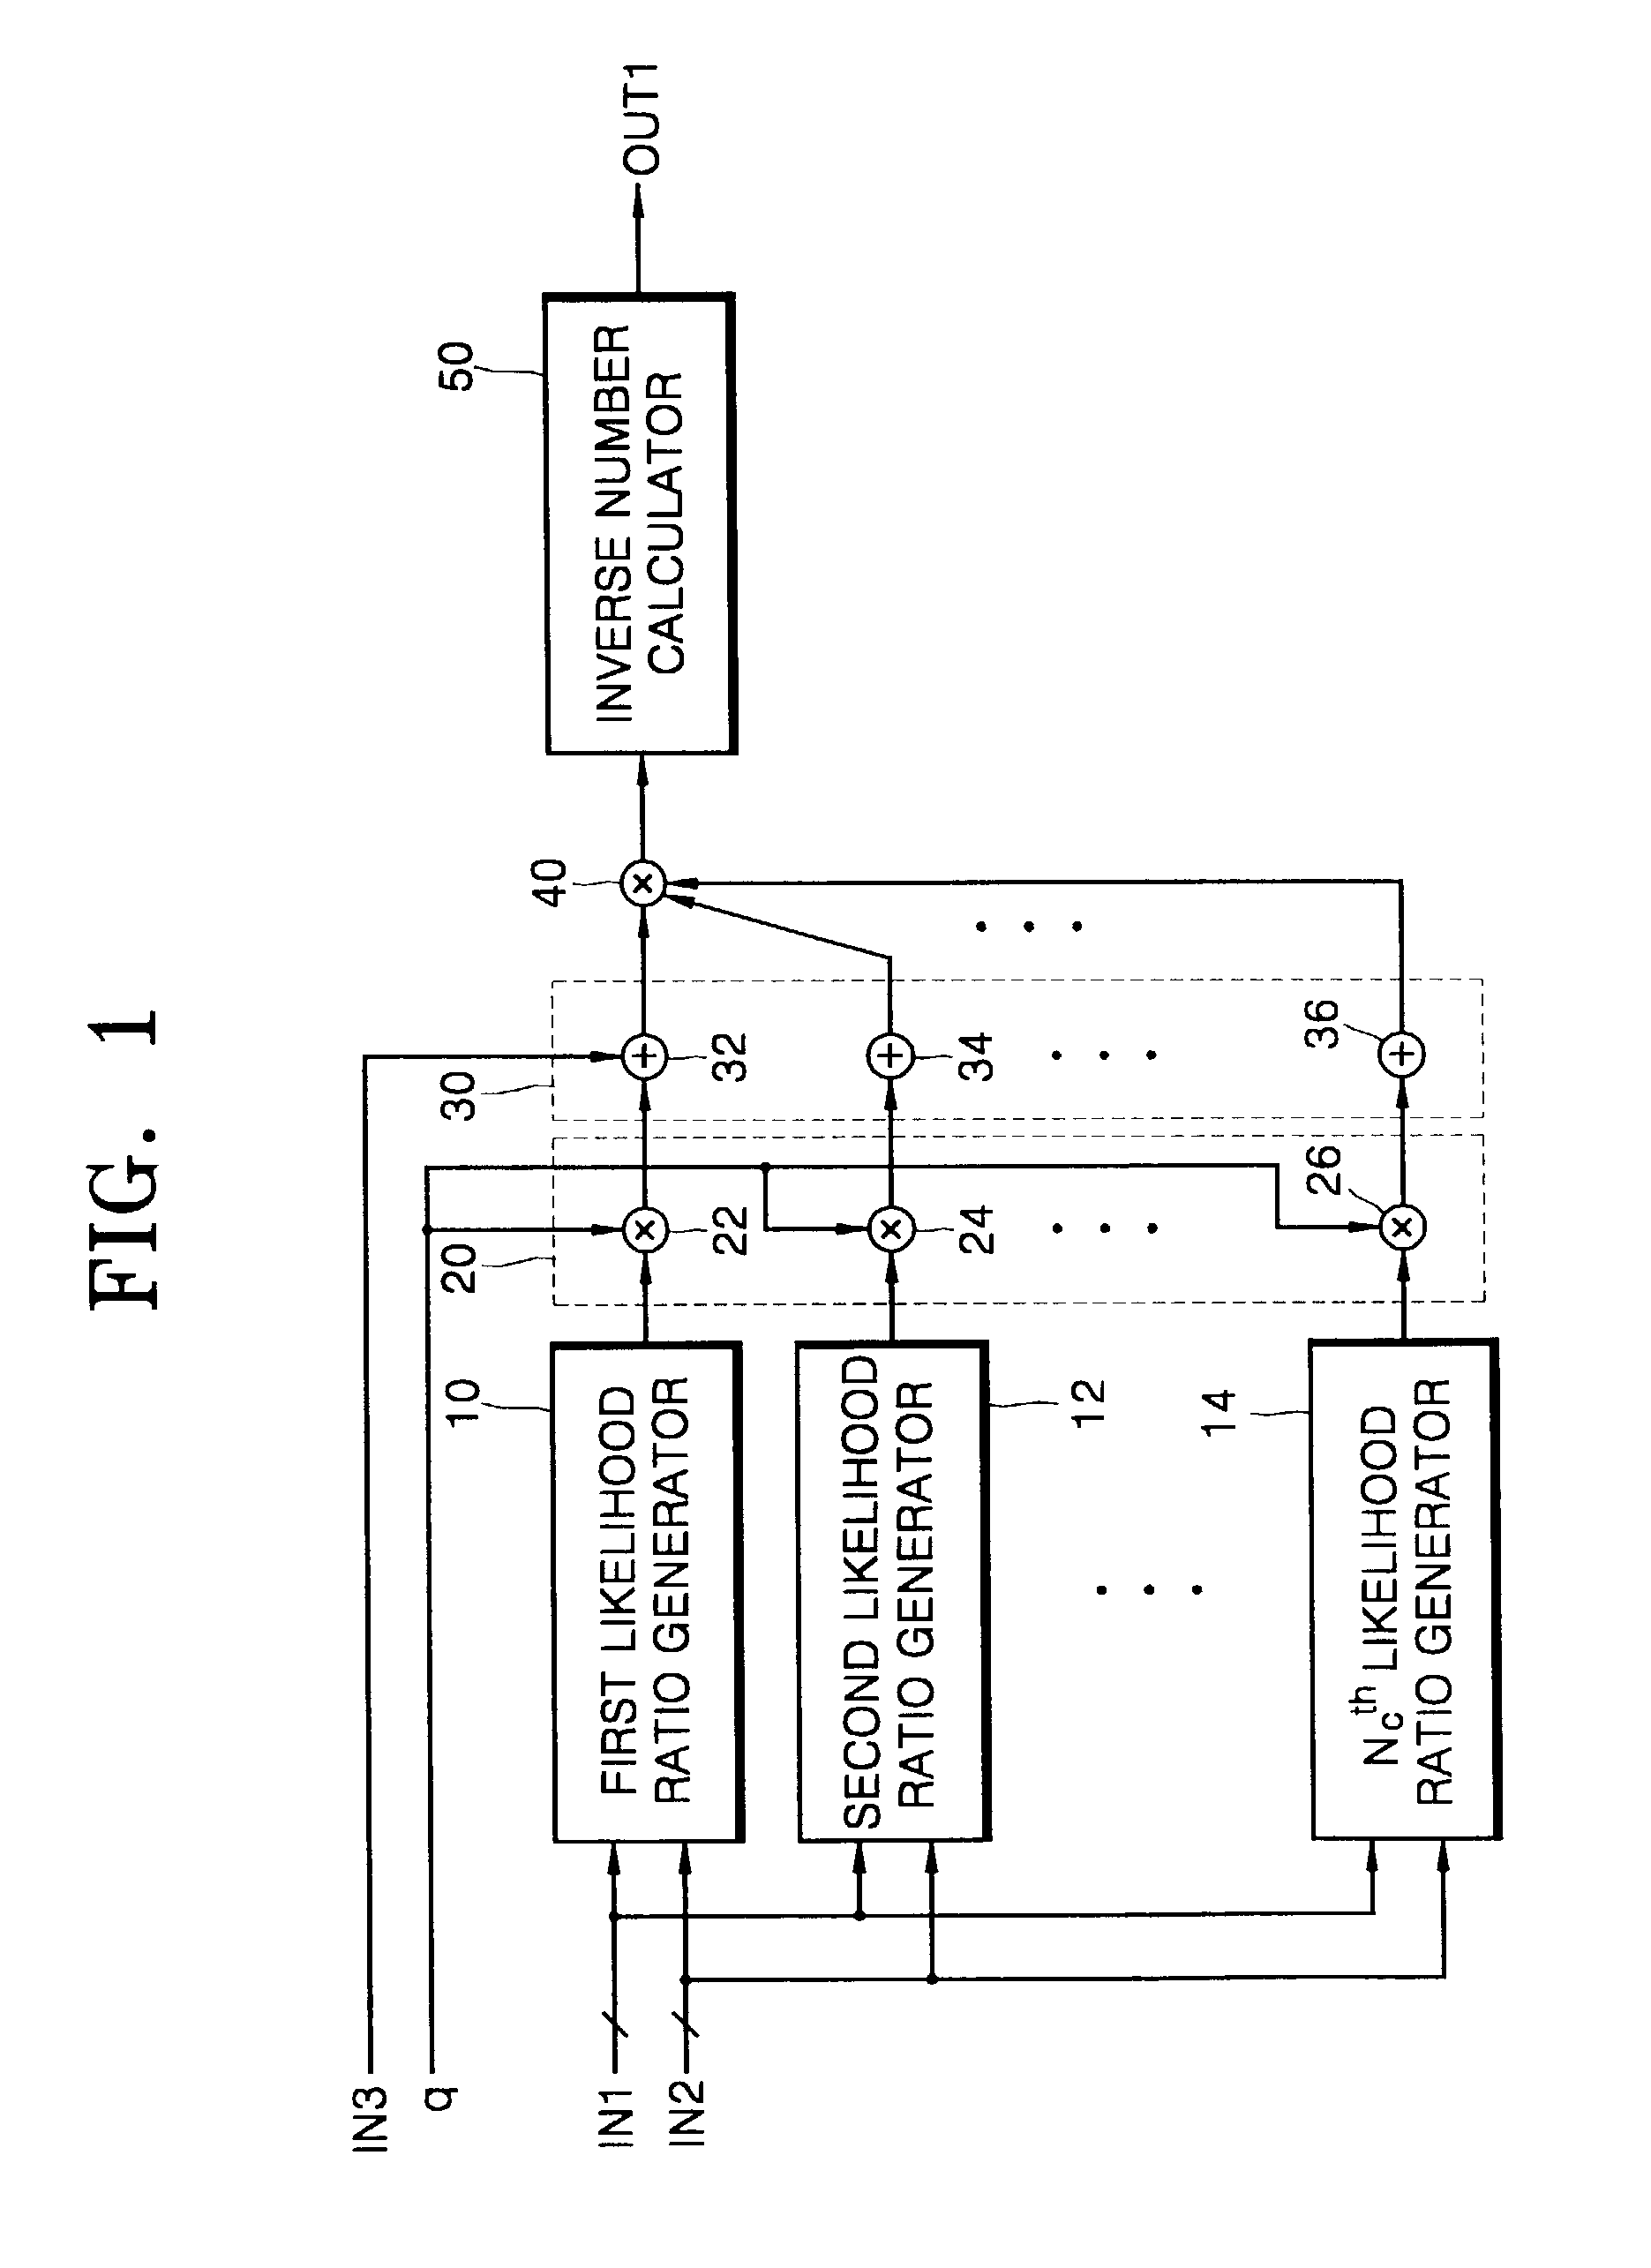 Apparatus and method for computing speech absence probability, and apparatus and method removing noise using computation apparatus and method